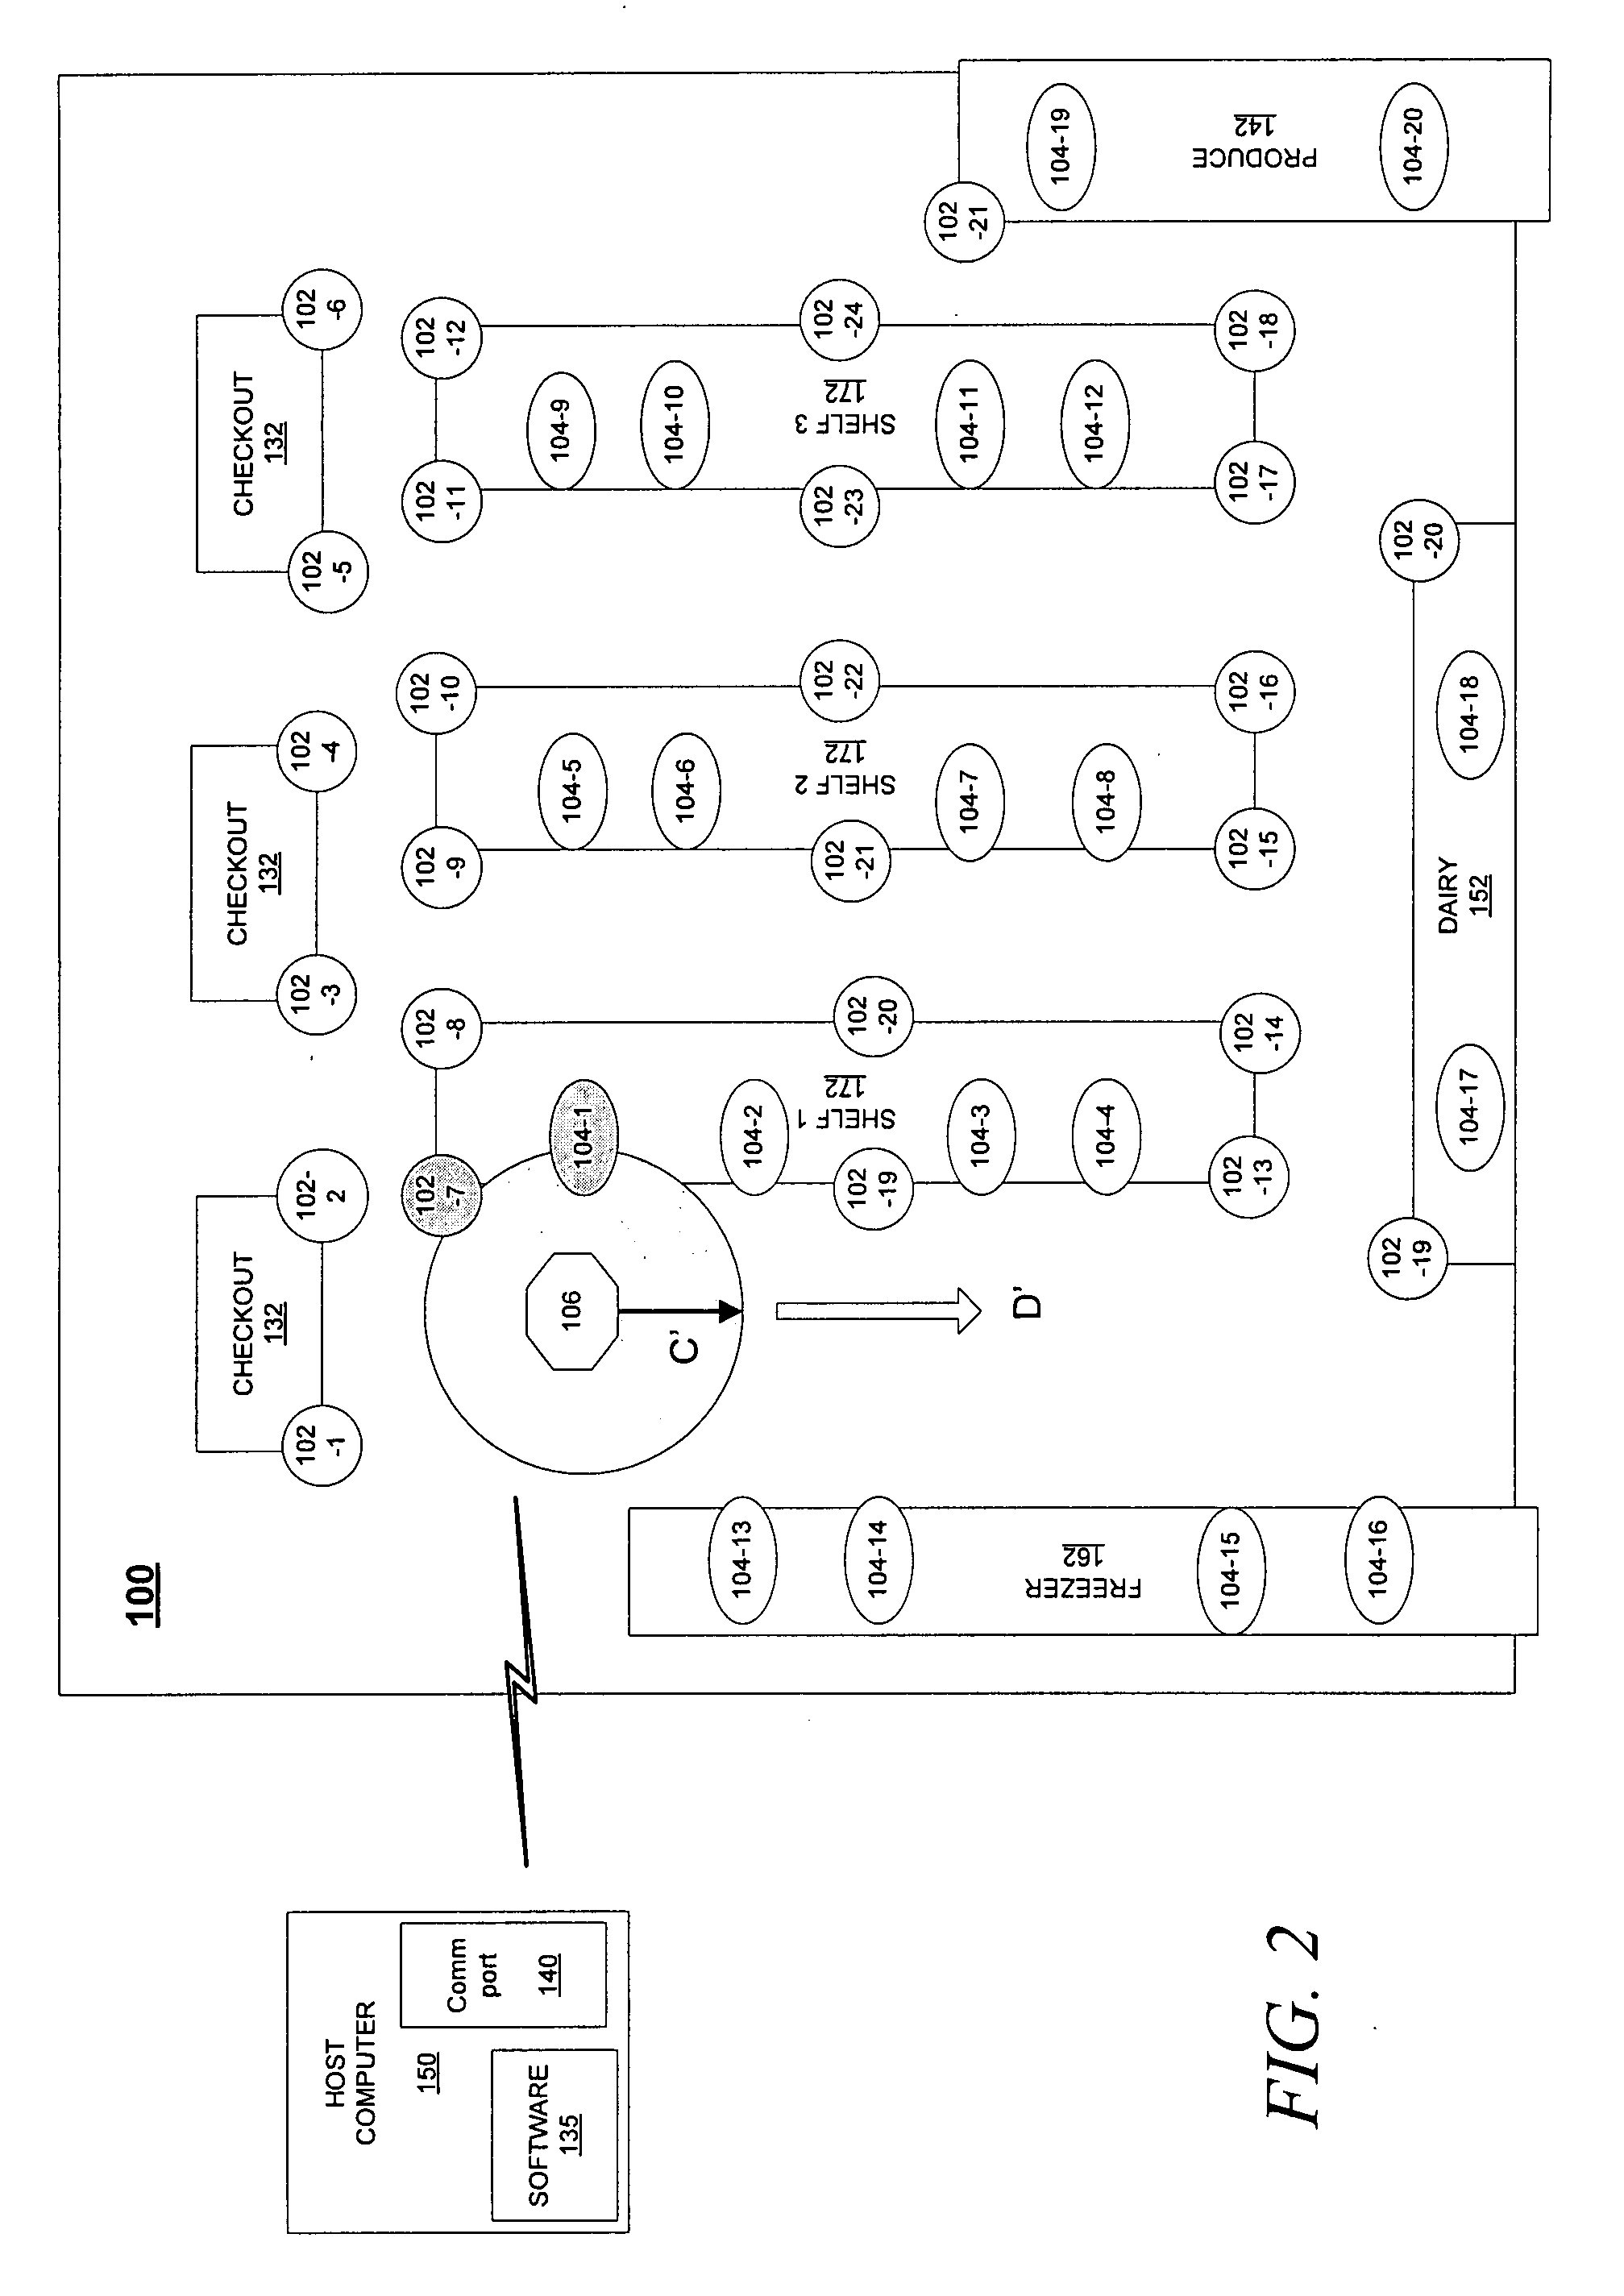 Method and System for Performing Mobile RFID Asset Detection and Tracking